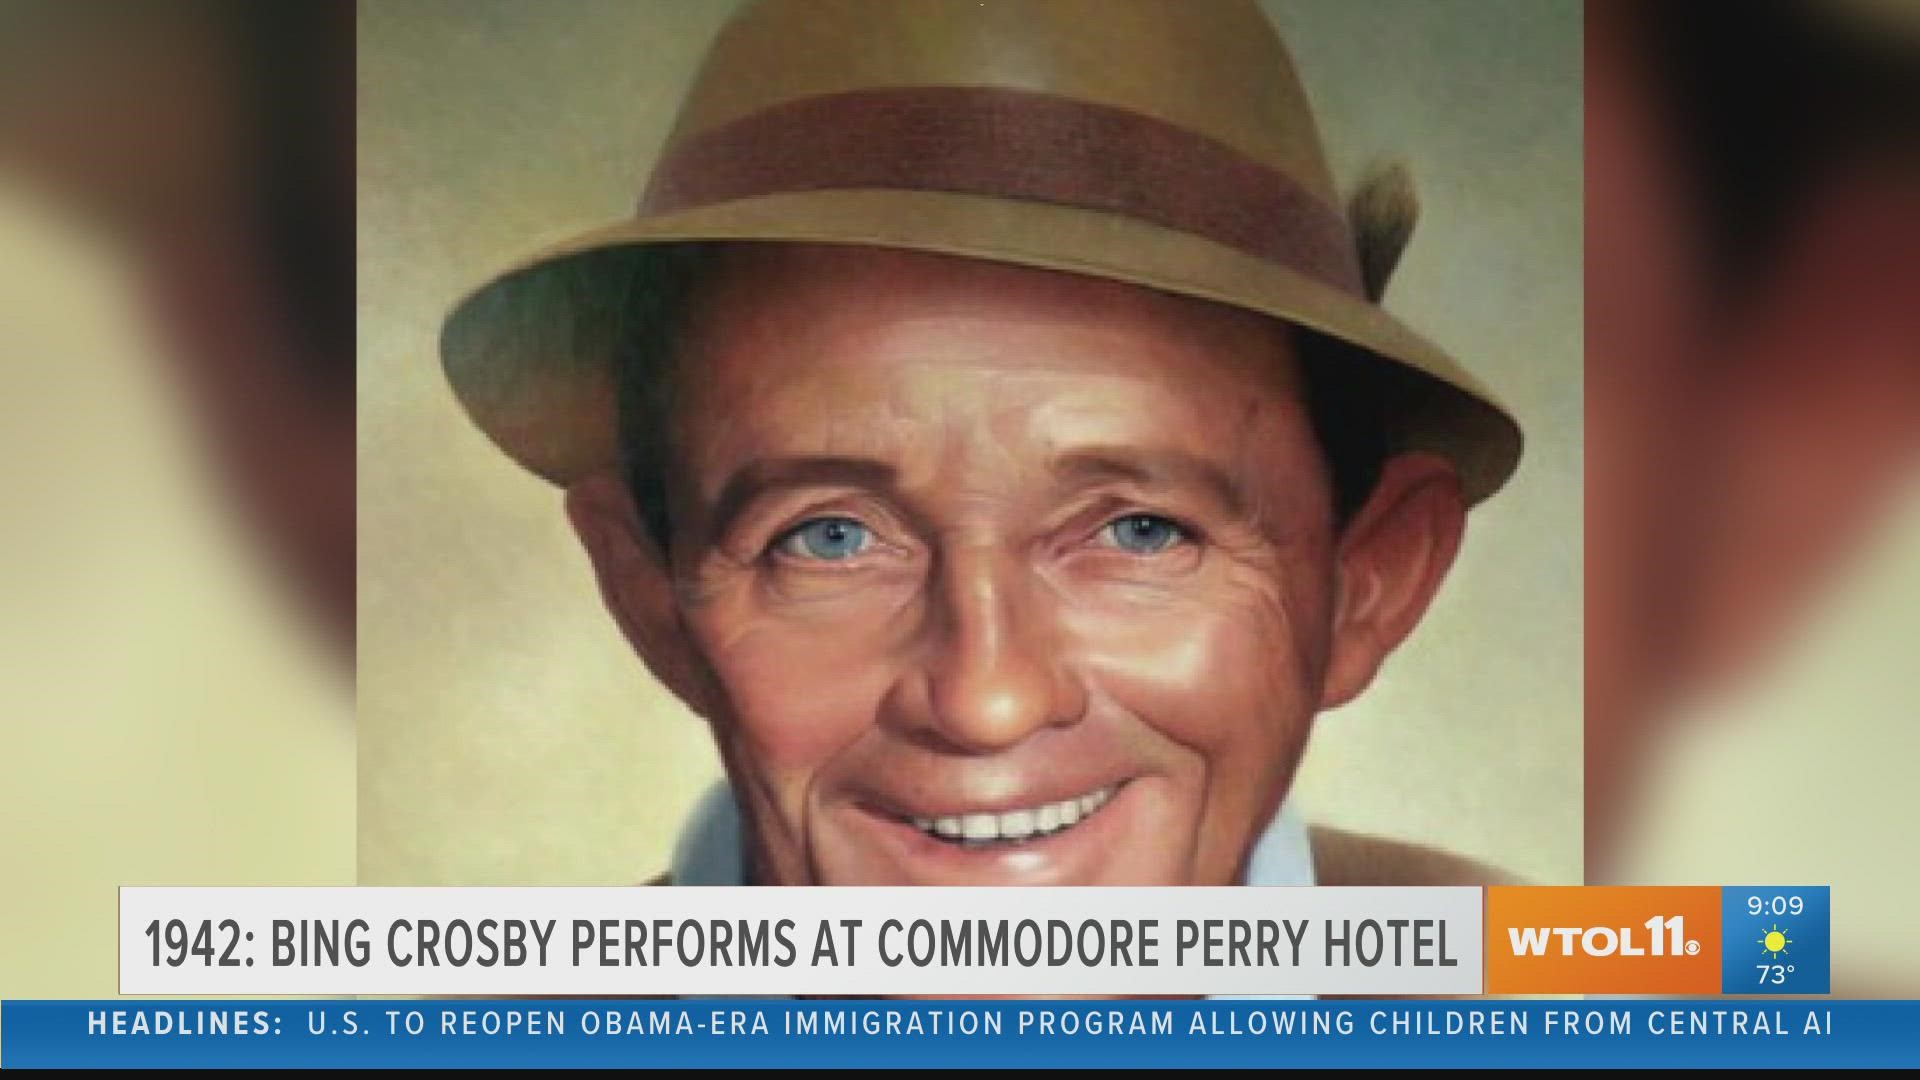 In 1942, Bing Crosby preformed at the Commodore Perry Hotel.